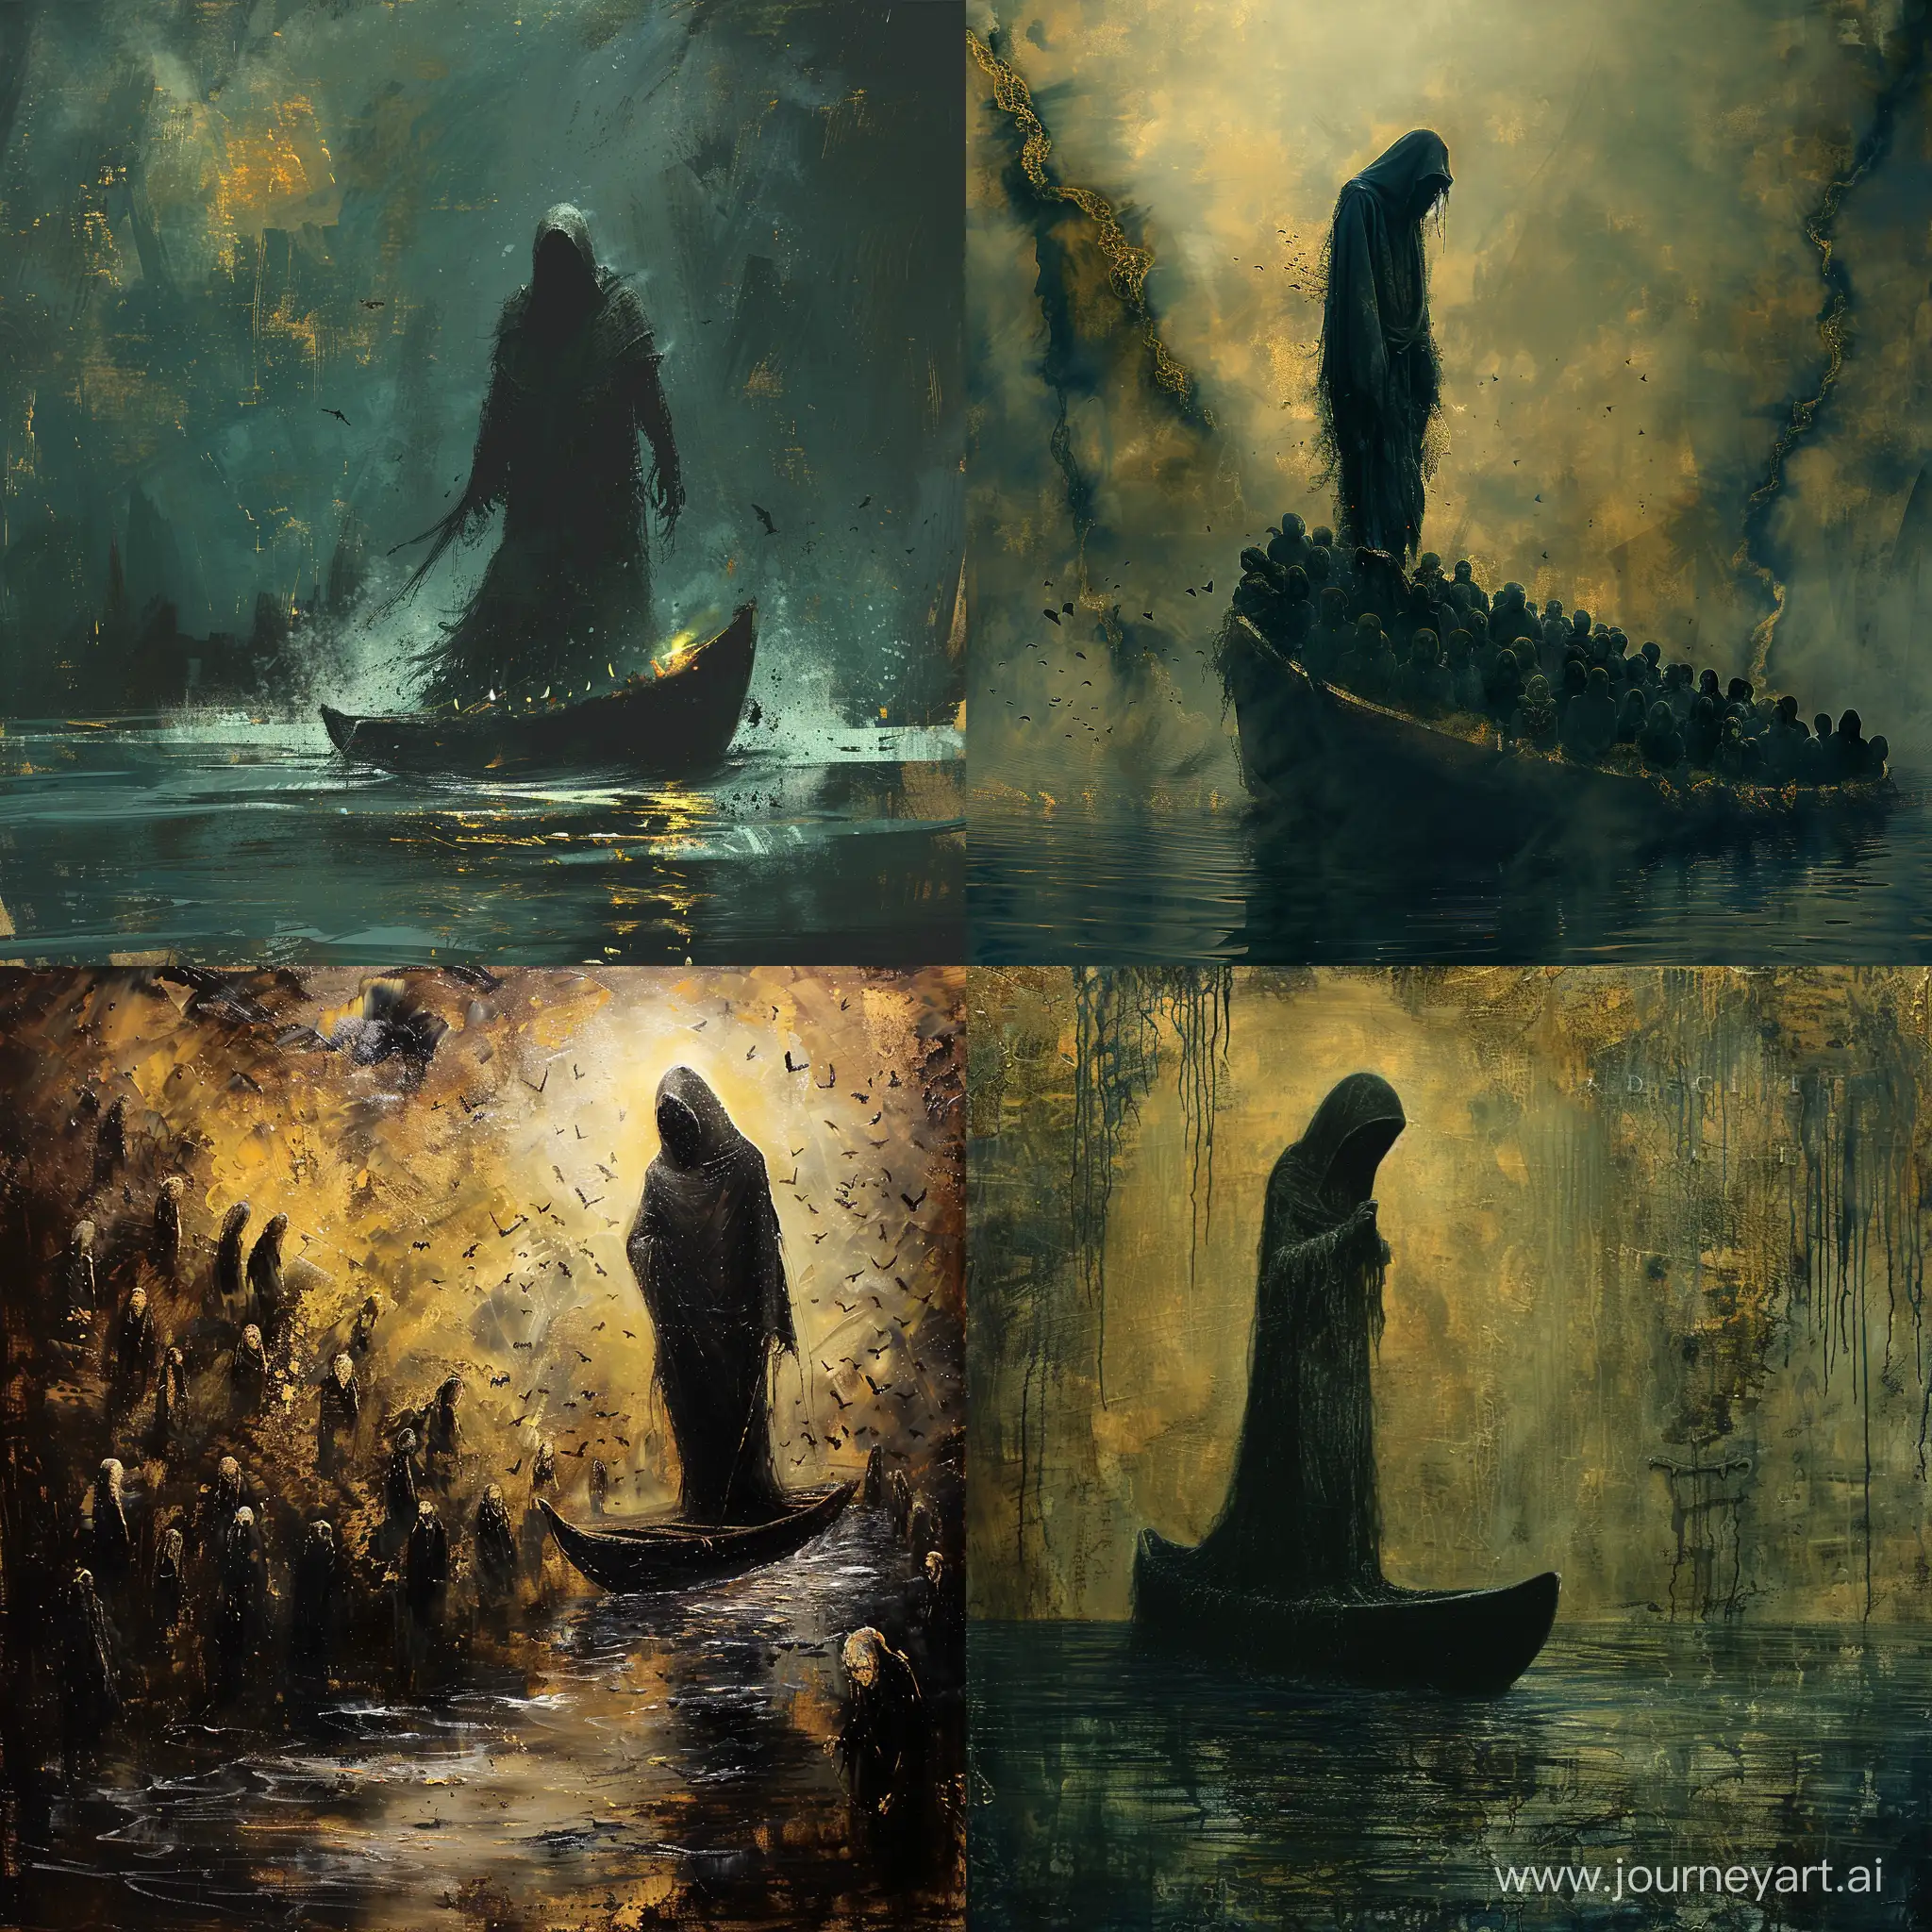  a hooded ferryman standing on a boat floating on a river of souls in the style of a crude oil painting